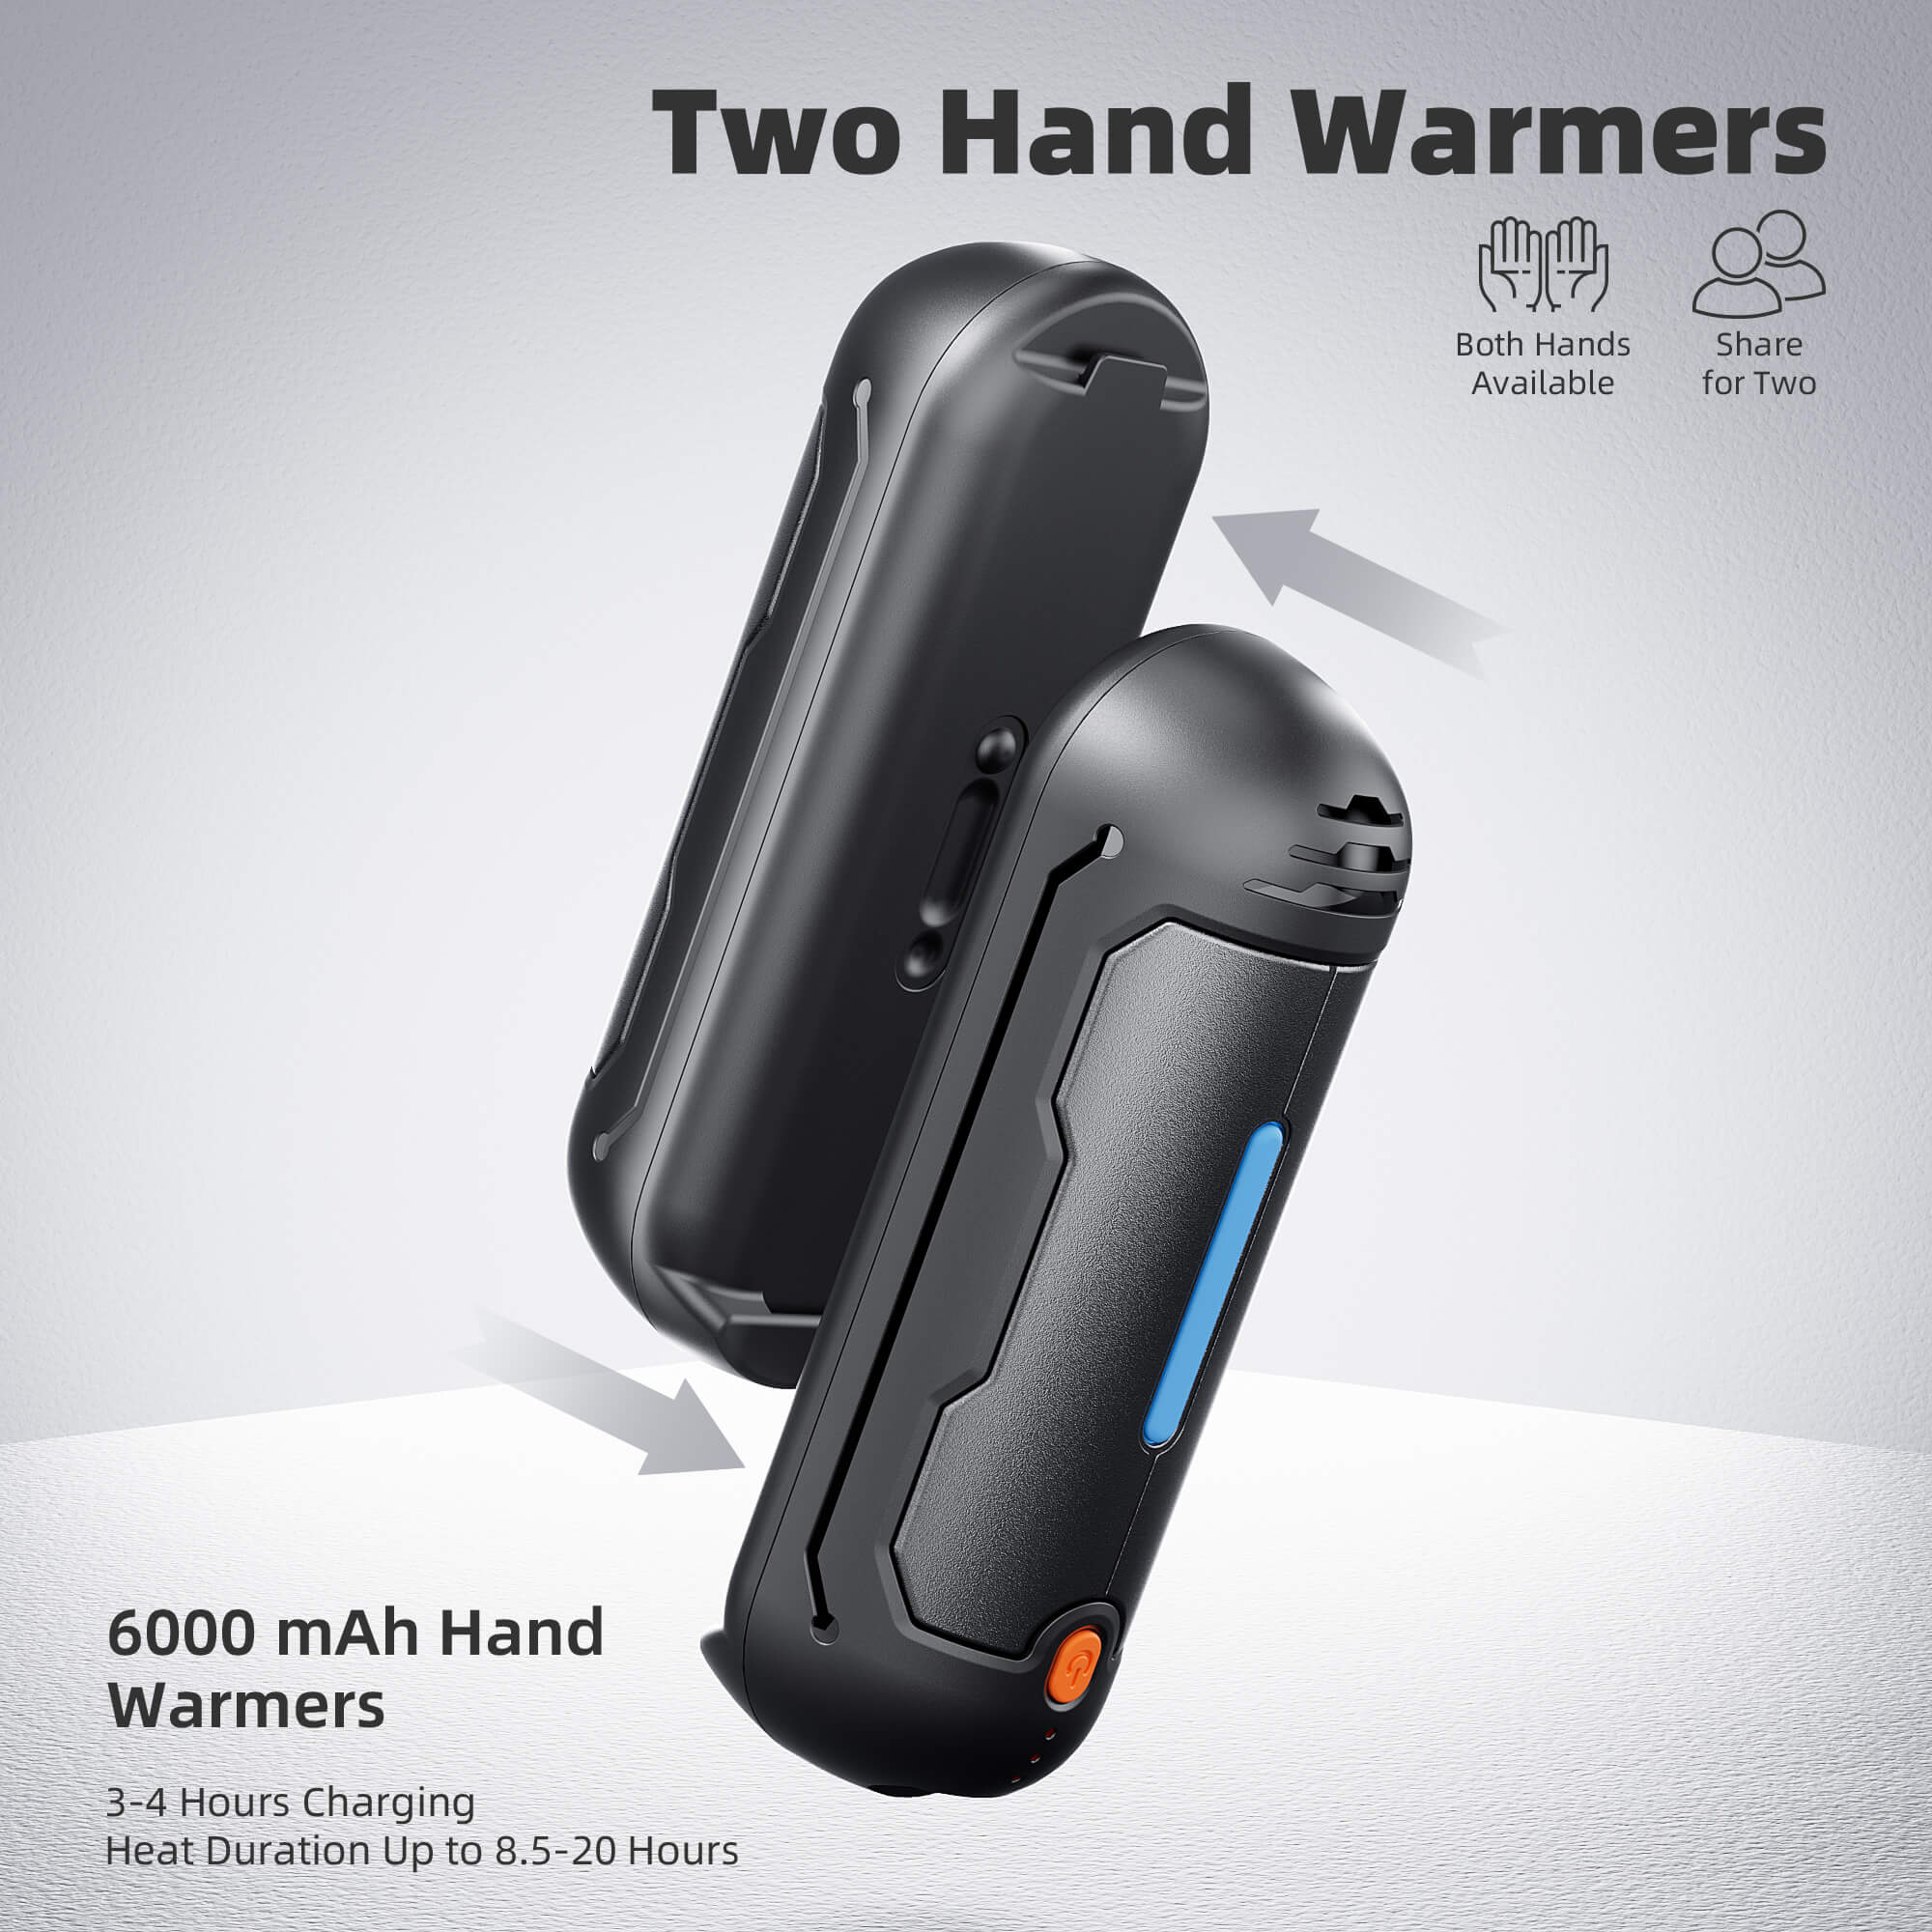 Xtao 2-Pack Hand Warmer Rechargeable, Upgraded 2-in-1 5200mAh Electric Hand Warmers, Portable USB Reusable Handwarmer, for Outdoor Camping, Skiing, Hunting, Golf, Gift - Black